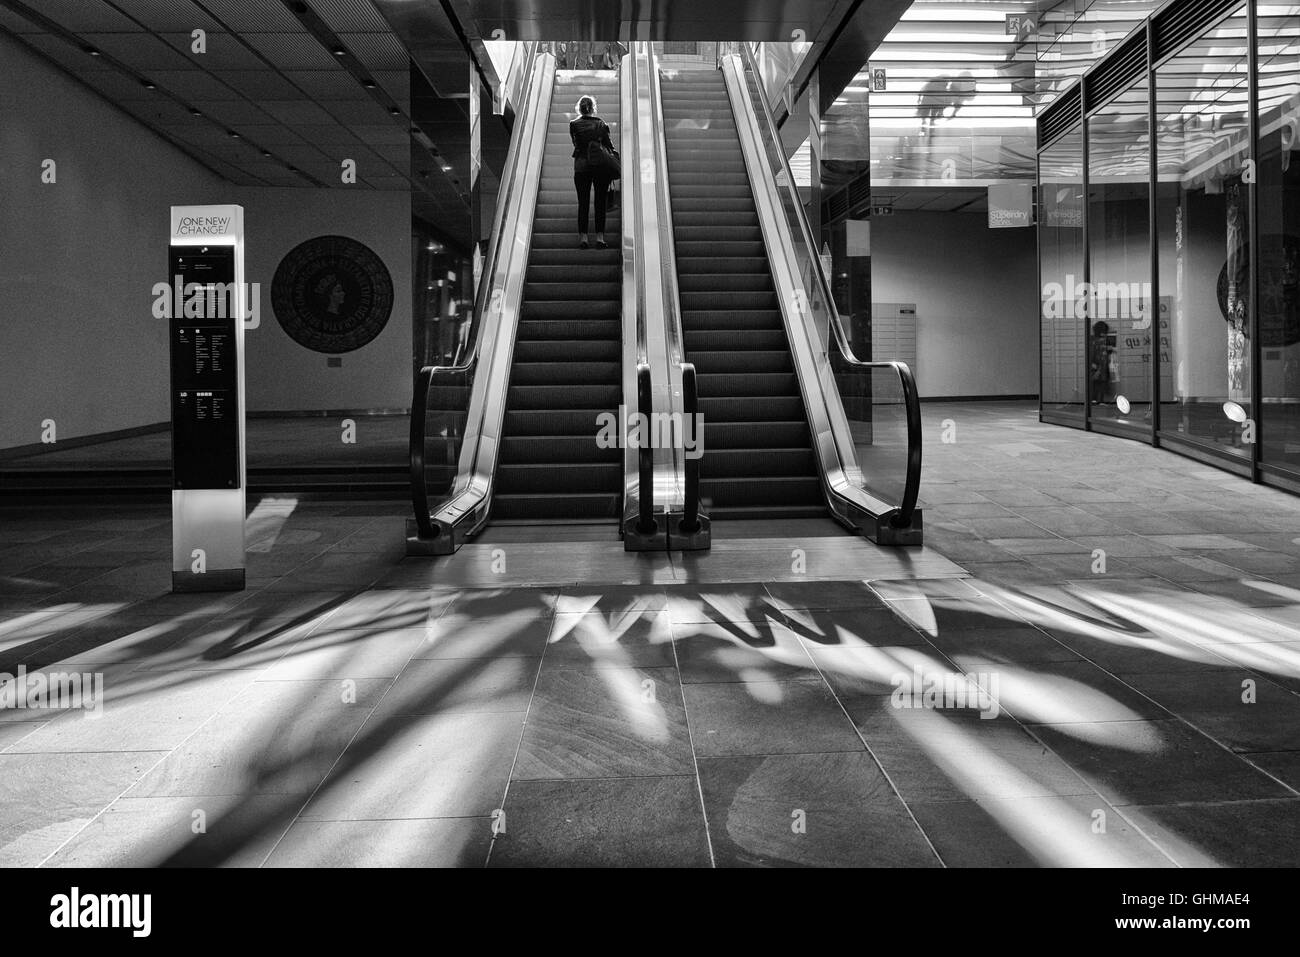 Woman using the escalators at One New Change Shopping Centre in London Stock Photo